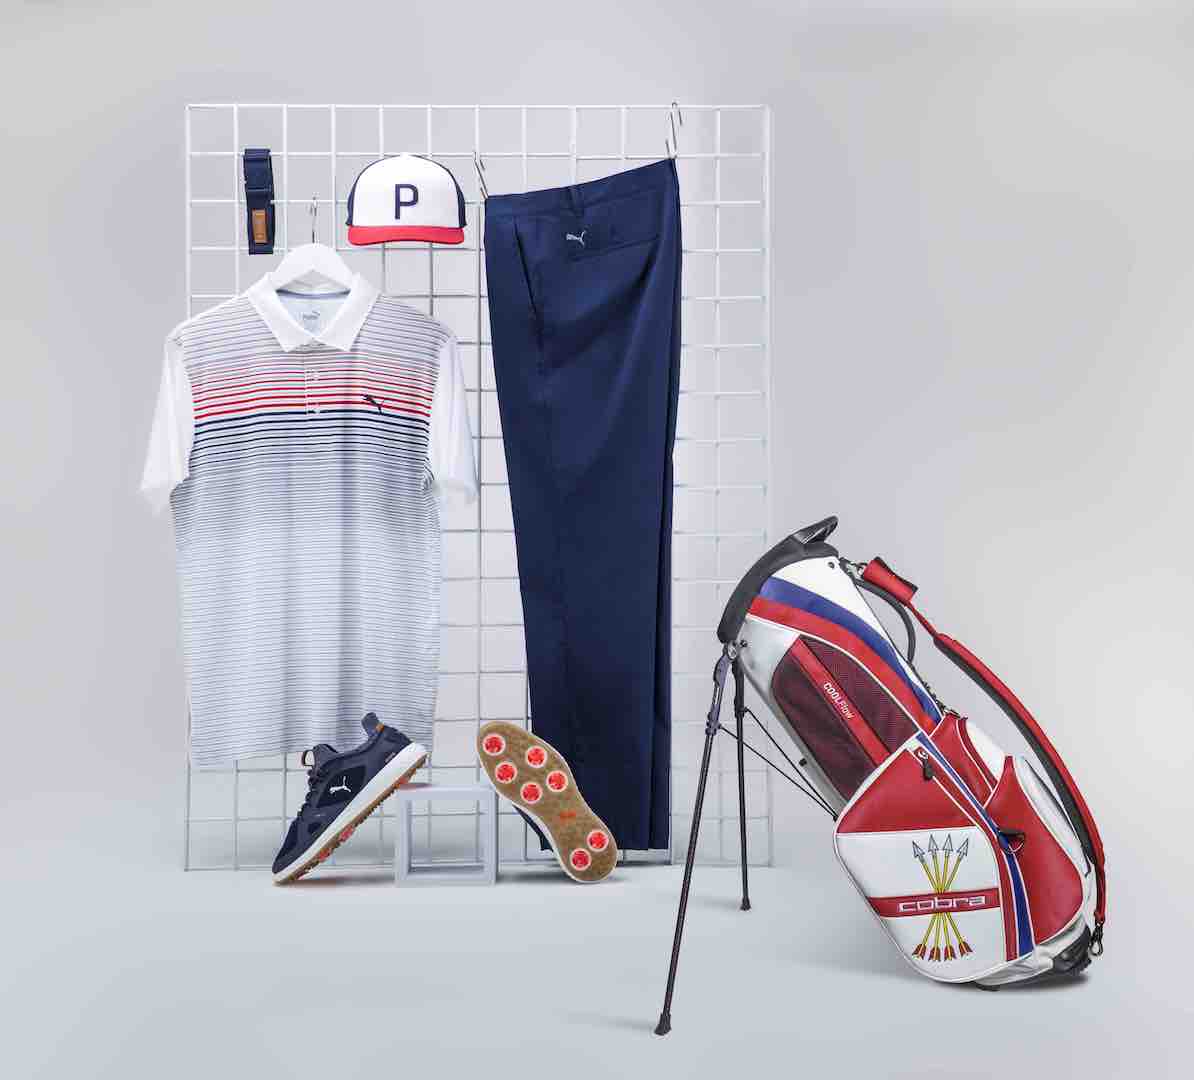 Rickie Fowler's looks for the 118th US Open - GolfPunkHQ